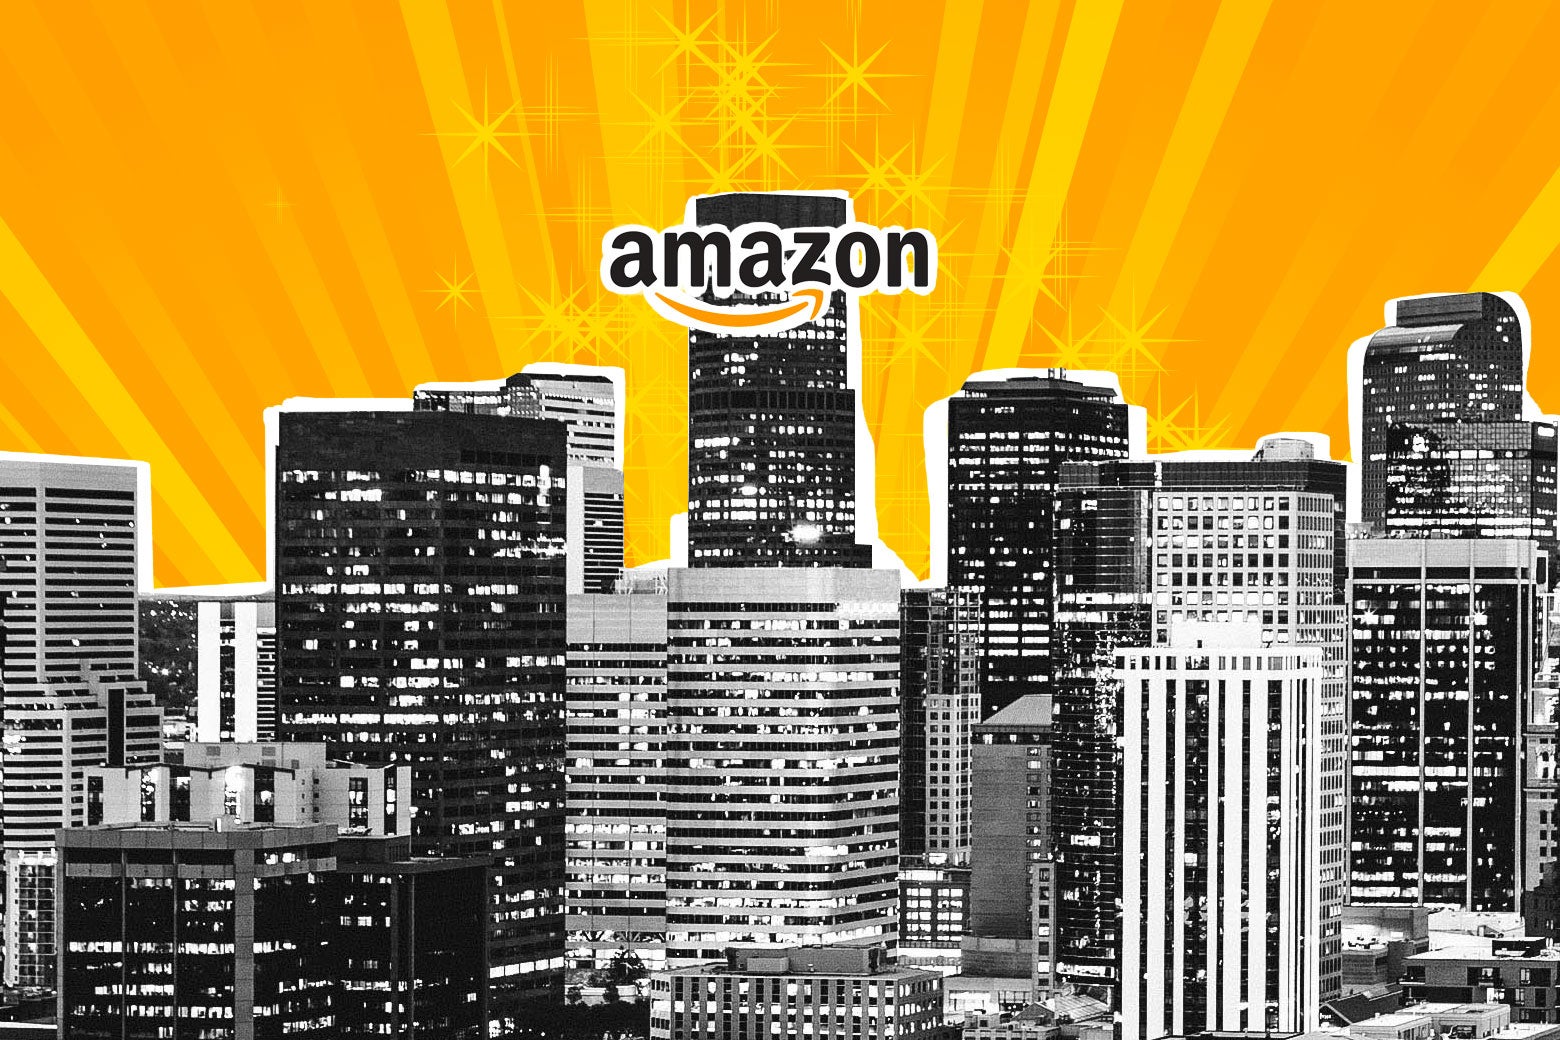 Light shines from the skyline of a city with a building labeled Amazon.